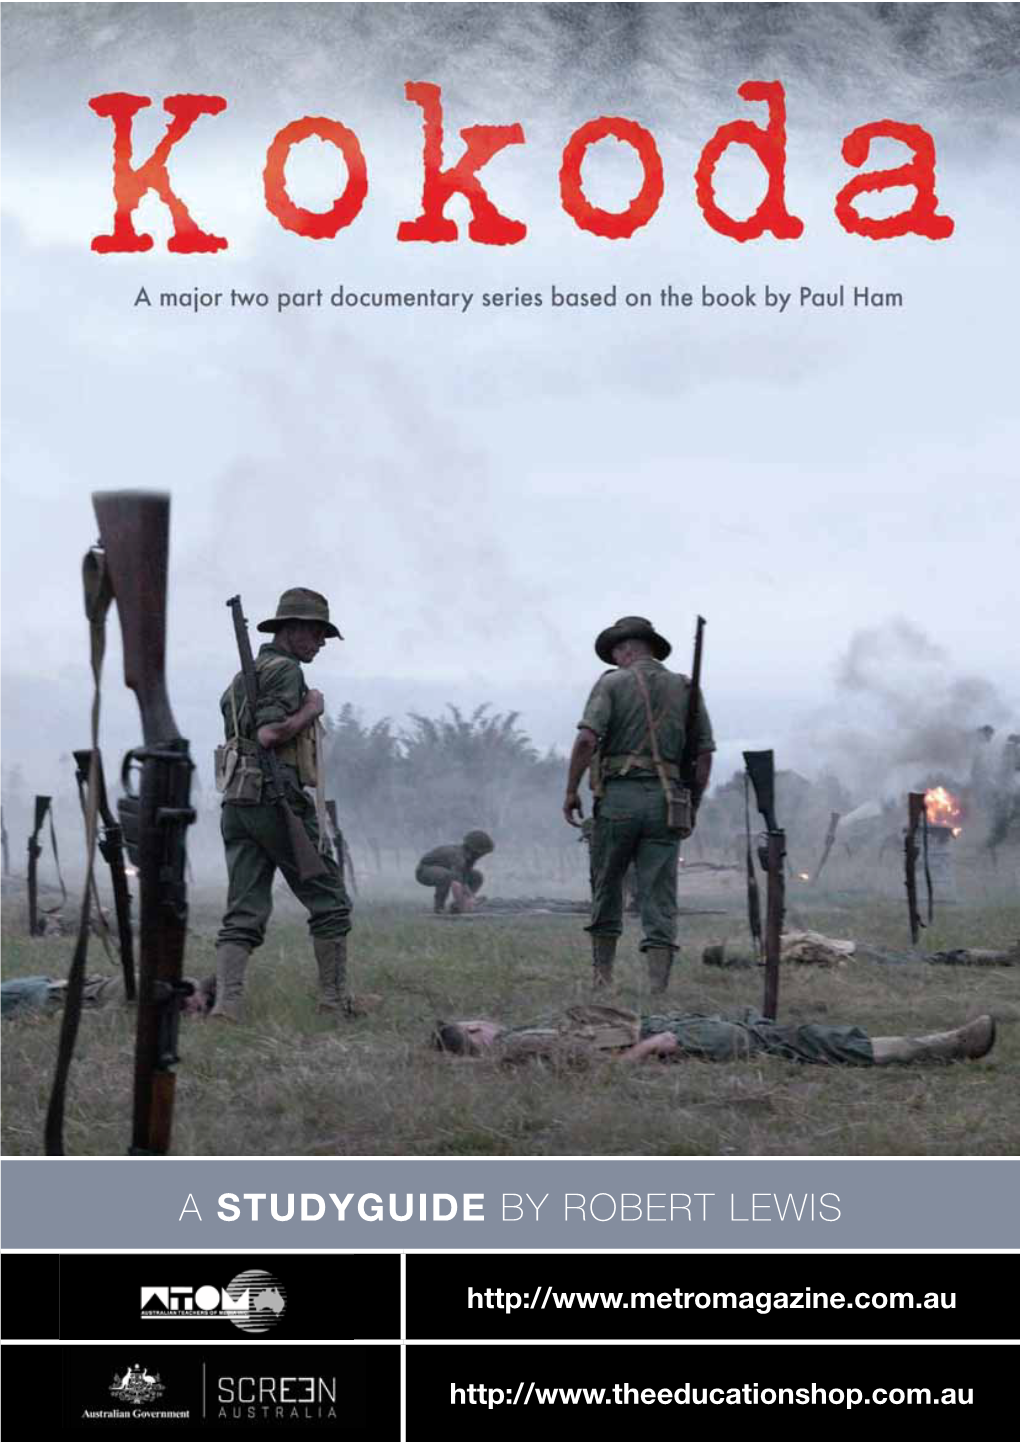 A Studyguide by Robert Lewis